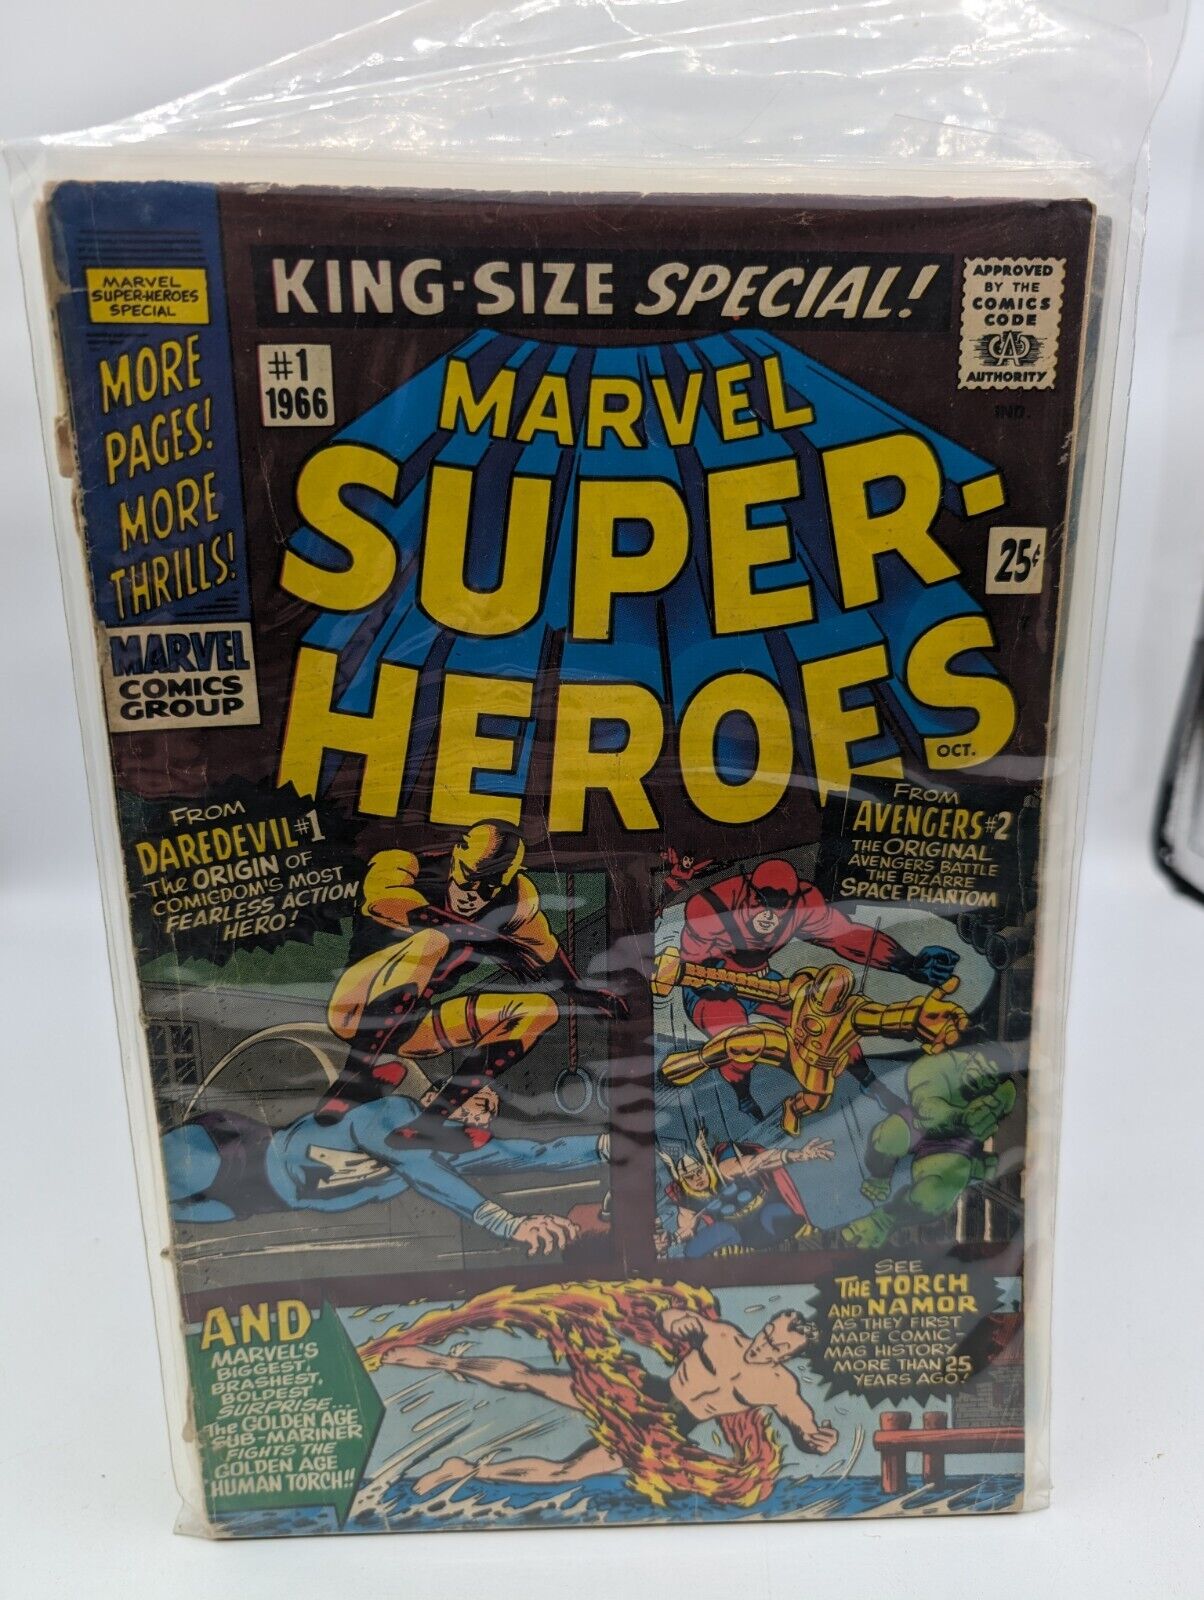 Marvel Super Heroes #1 1966 King Size Special